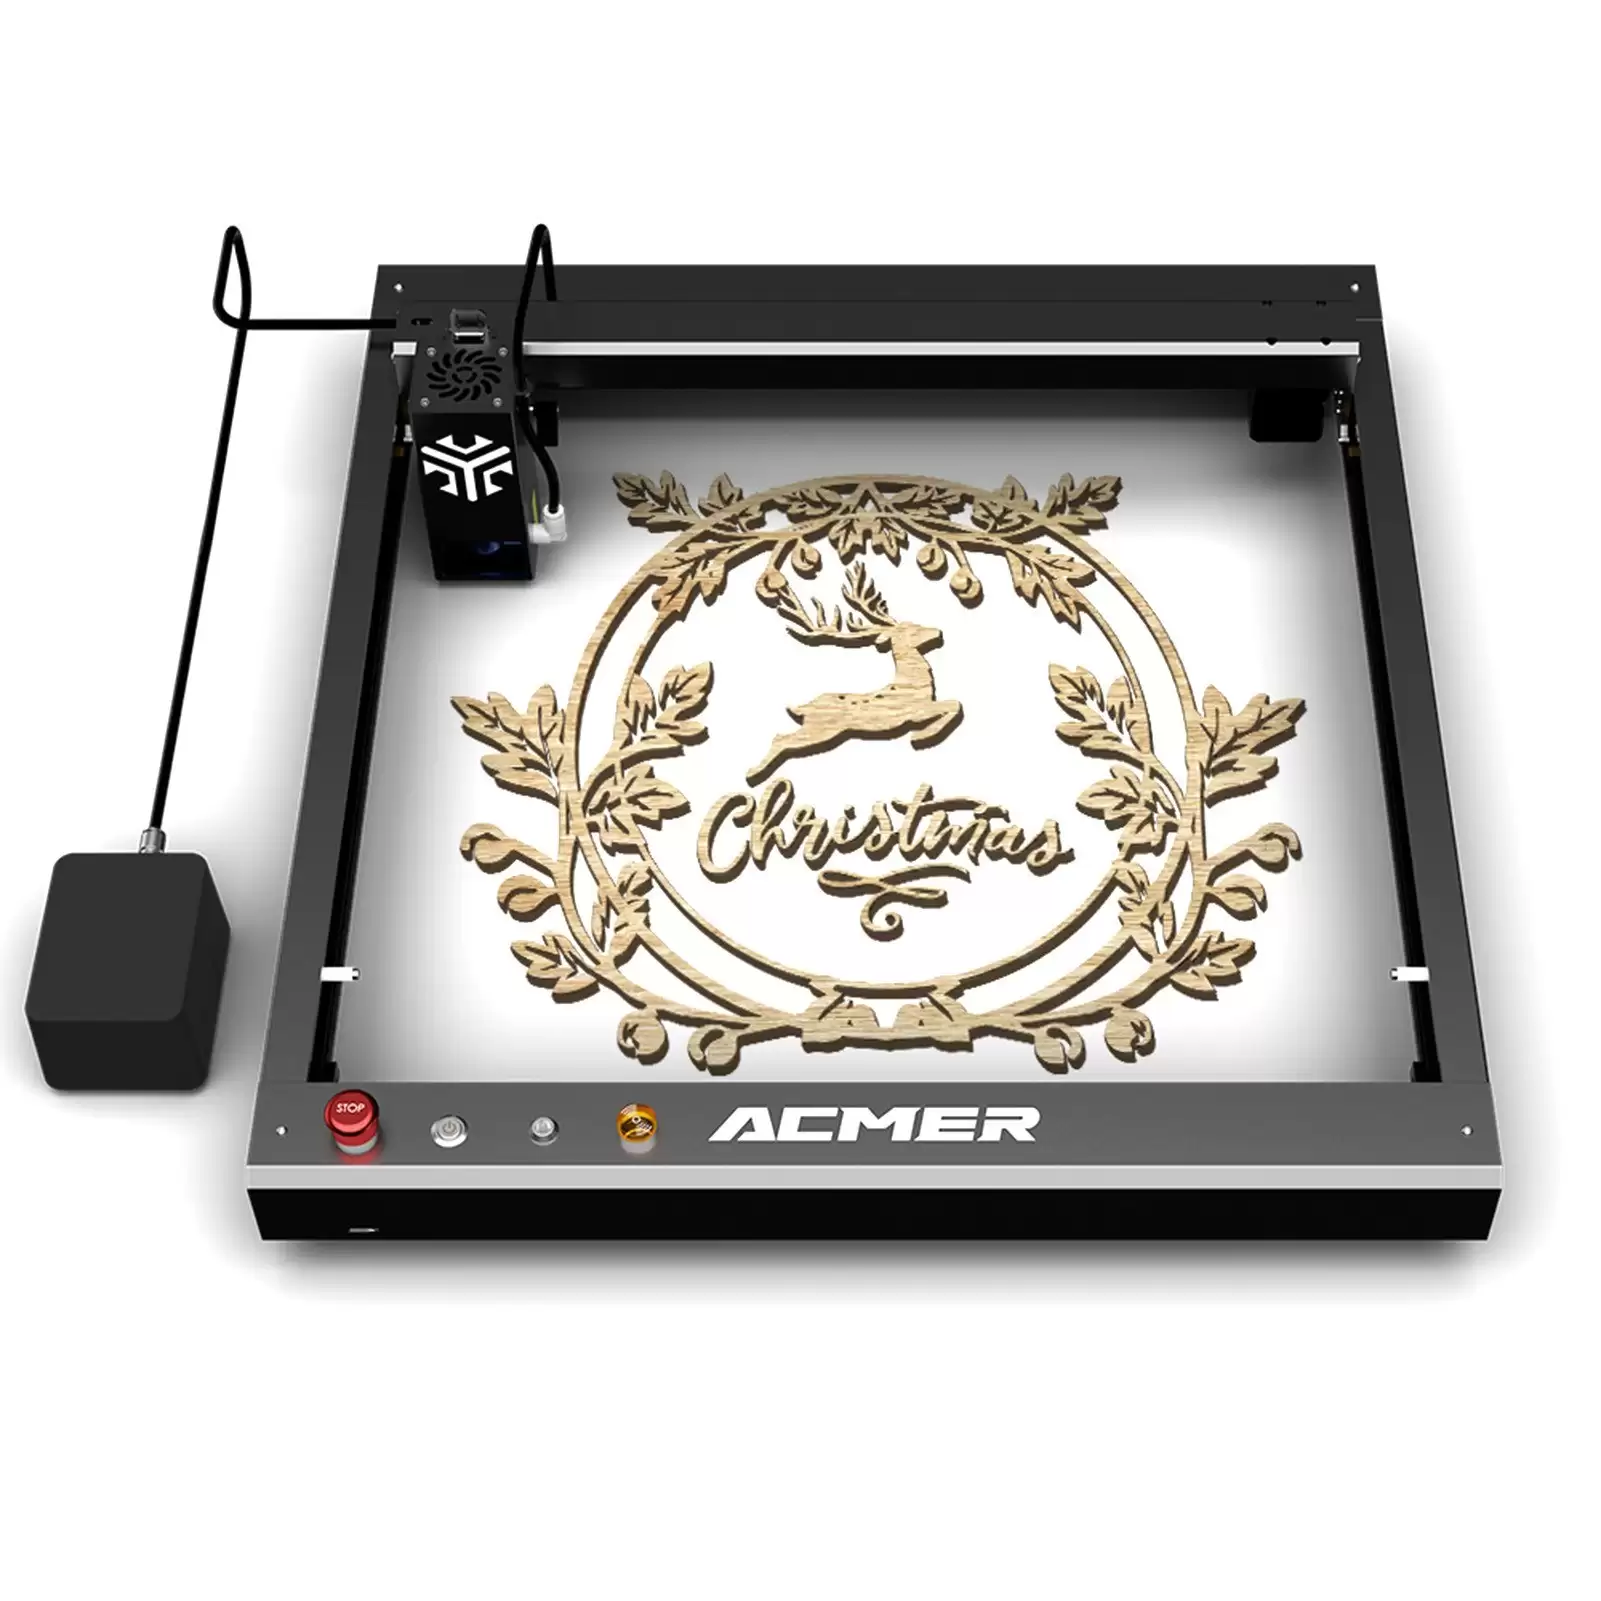 Order In Just $869.99 Acmer P2 33w Laser Engraver With Automatic Air-Assist System With This Tomtop Coupon